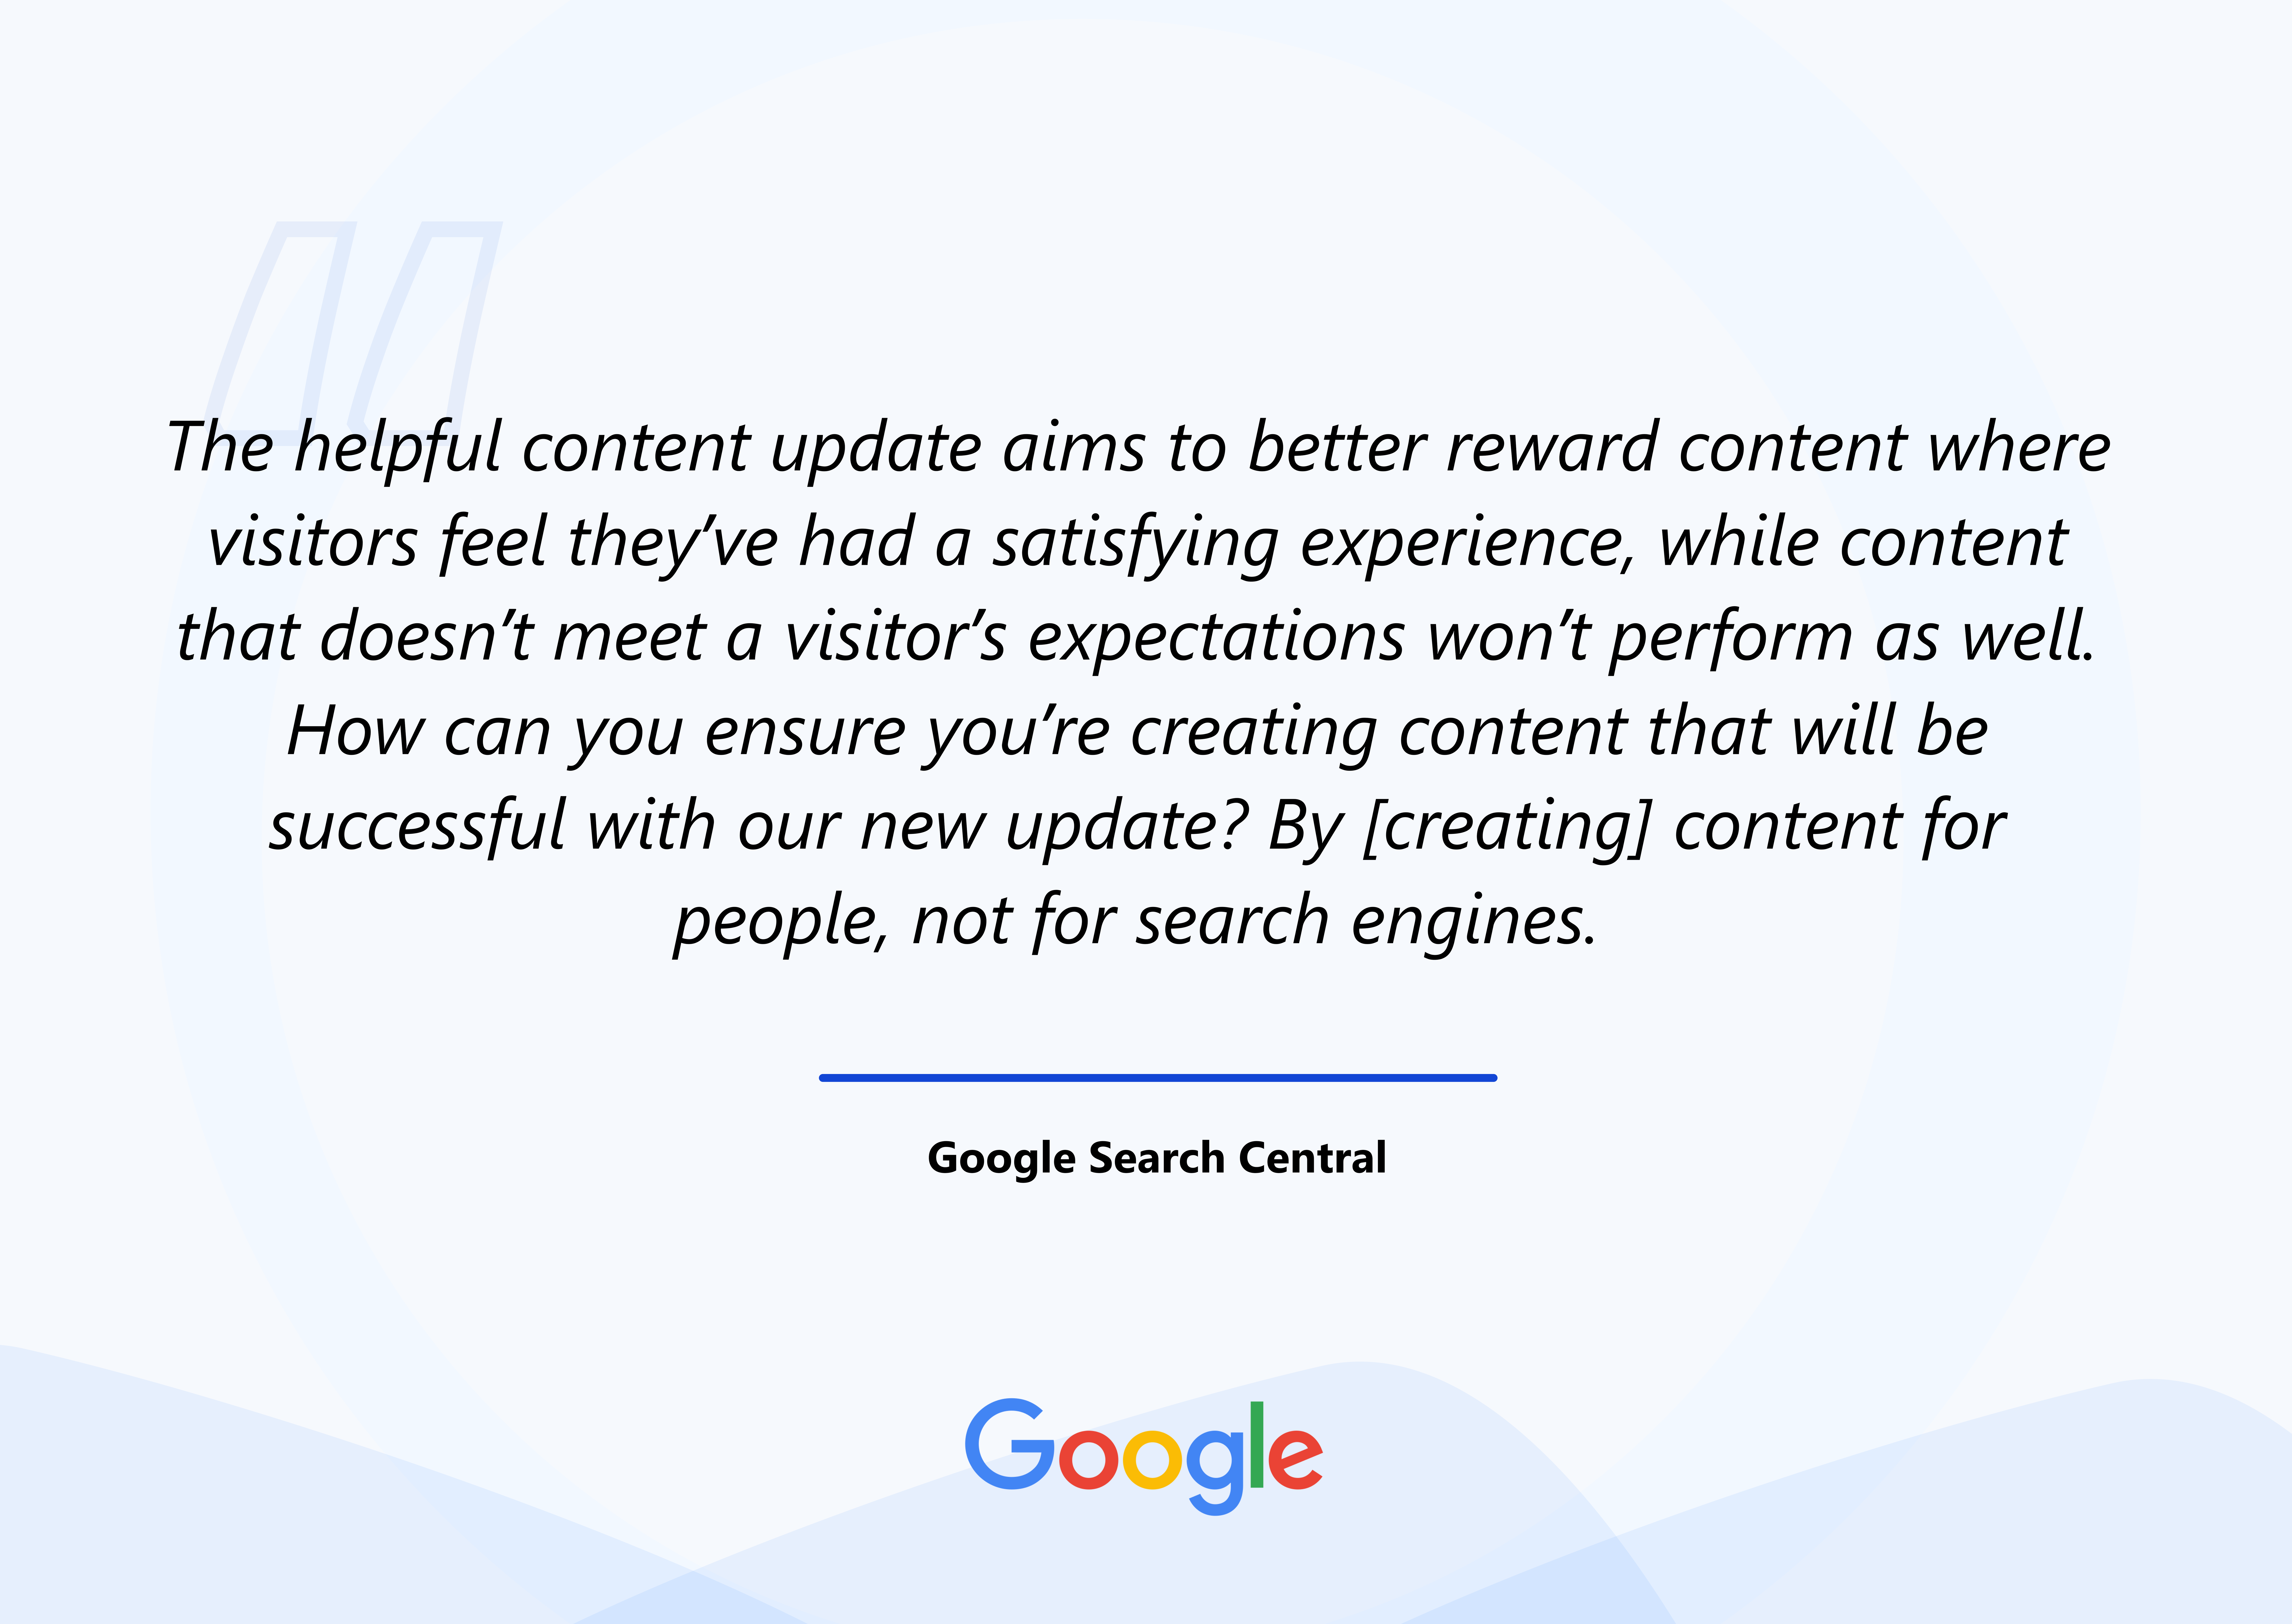 Create Content For People Not For Search Engines